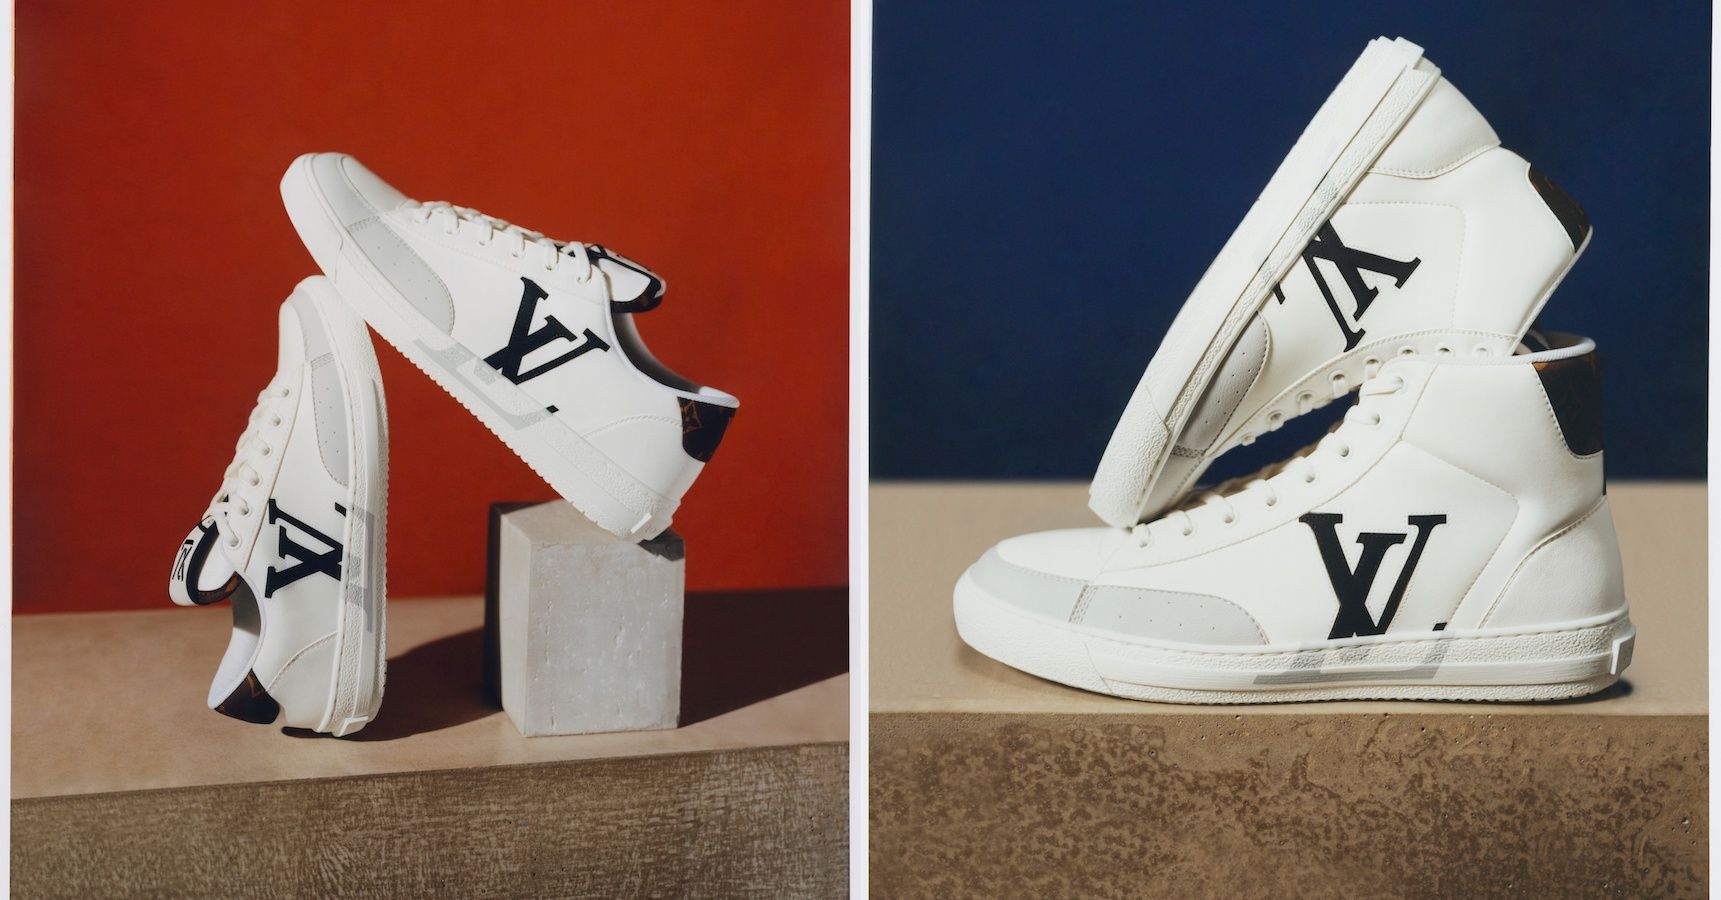 LOUIS VUITTON Men's LV Trainers - More Than You Can Imagine